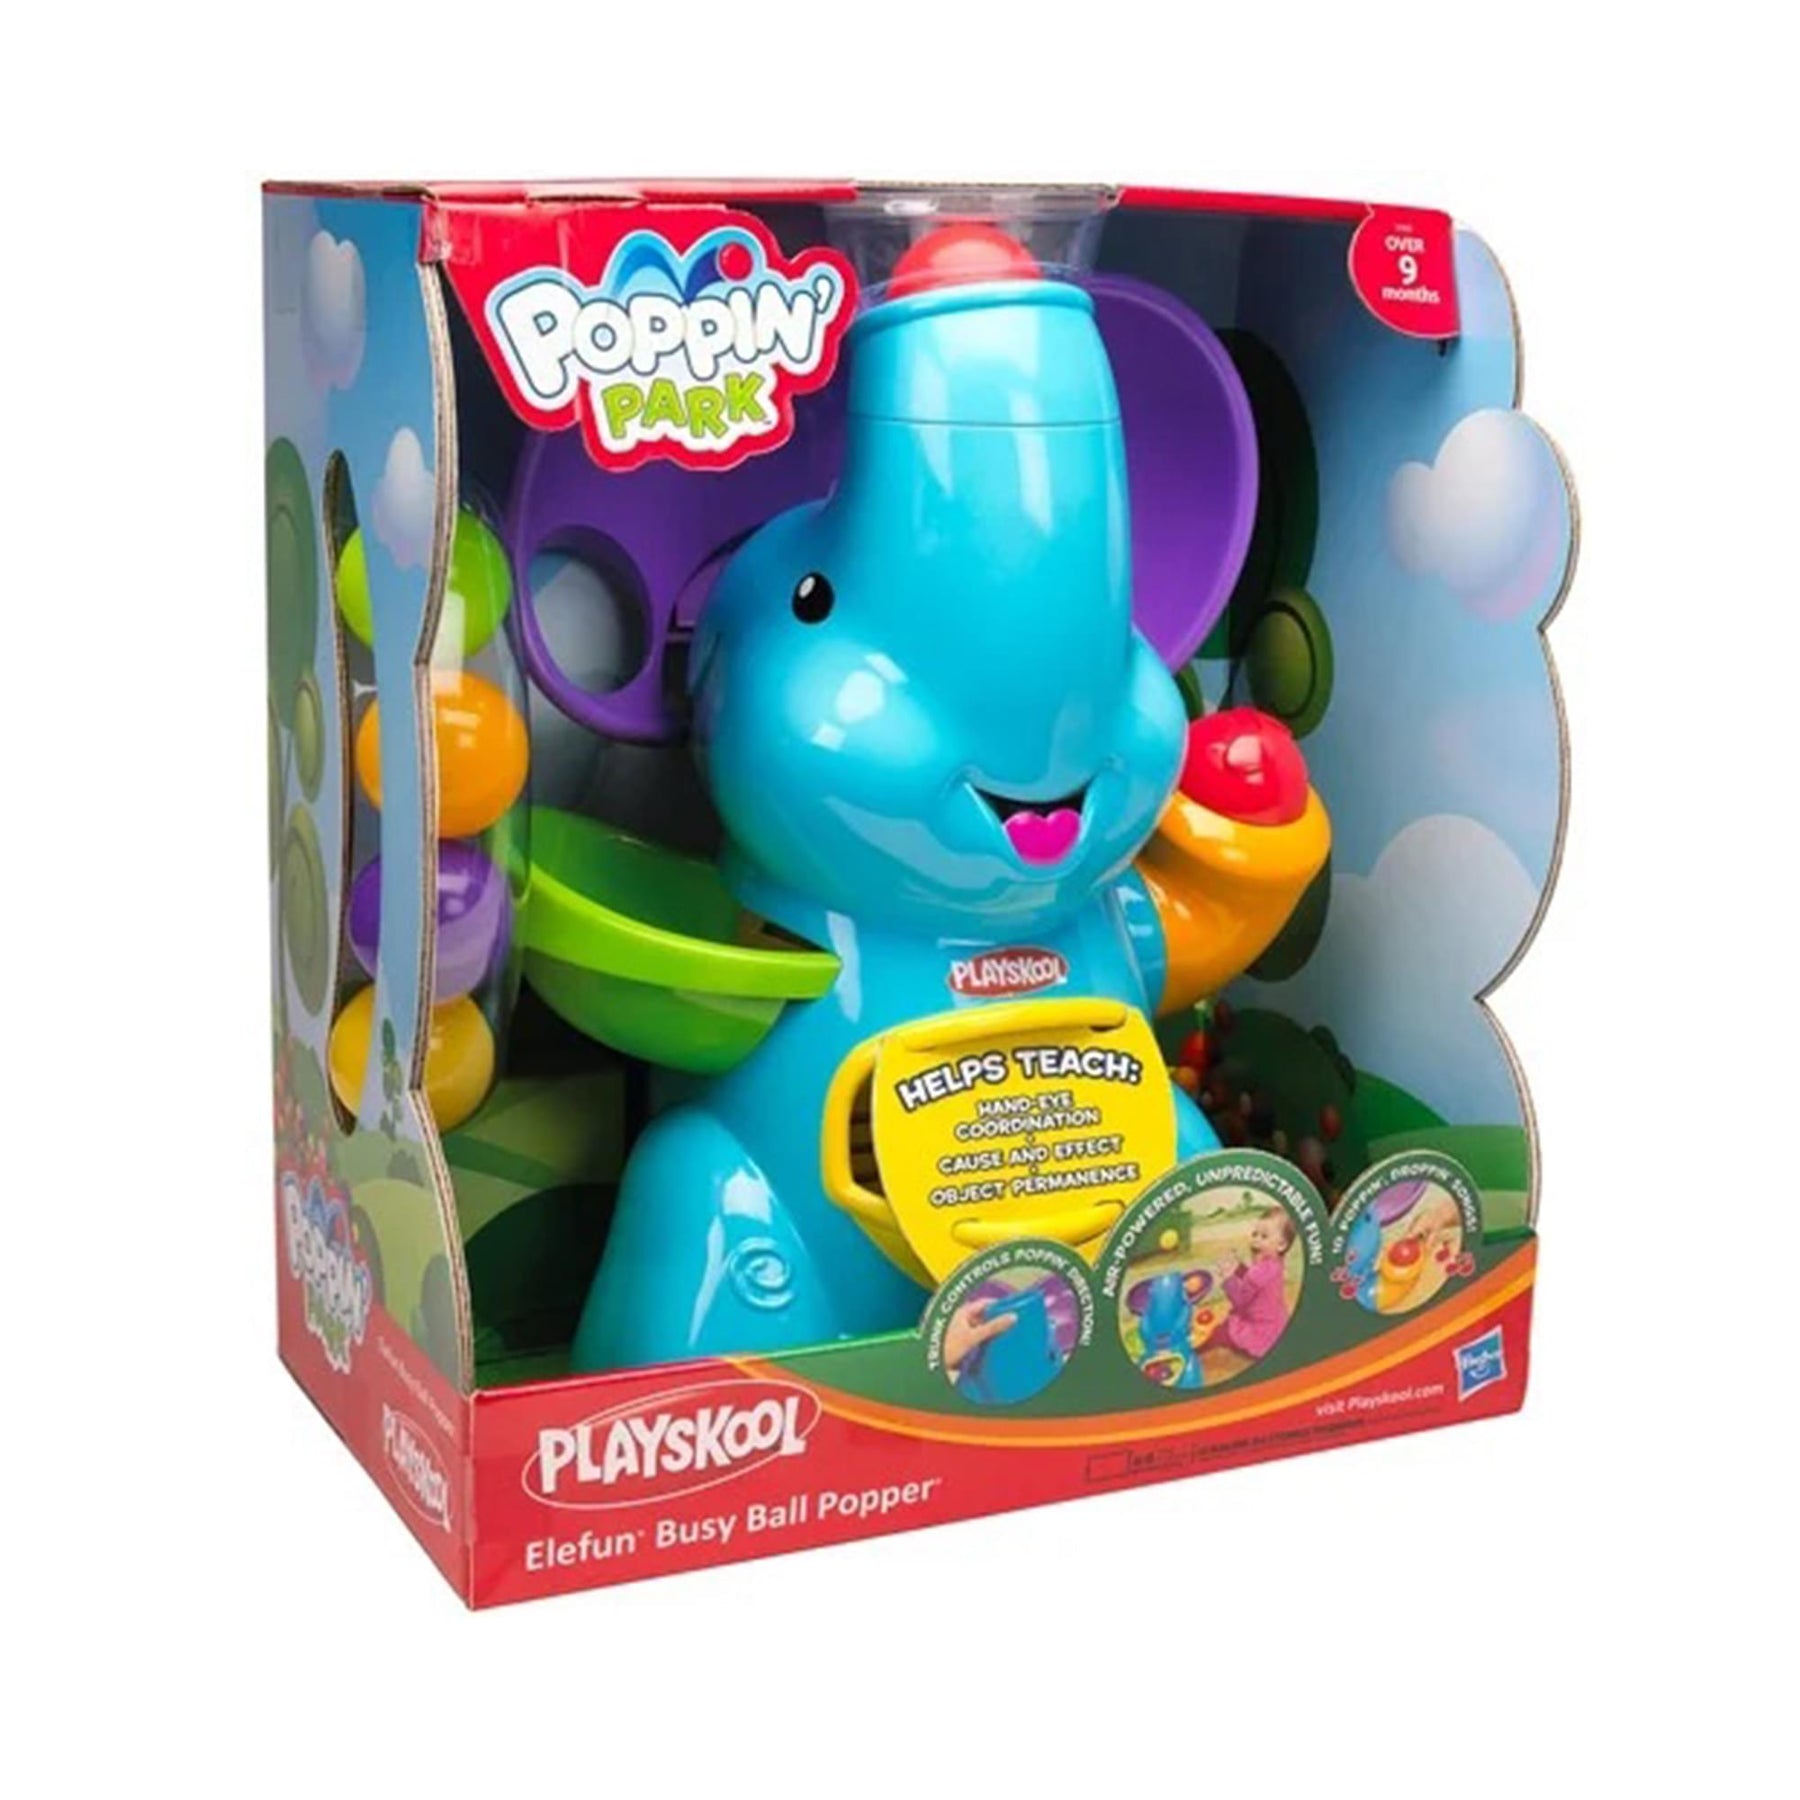 Playskool Elefun Busy Ball Popper Active Toy For Toddlers